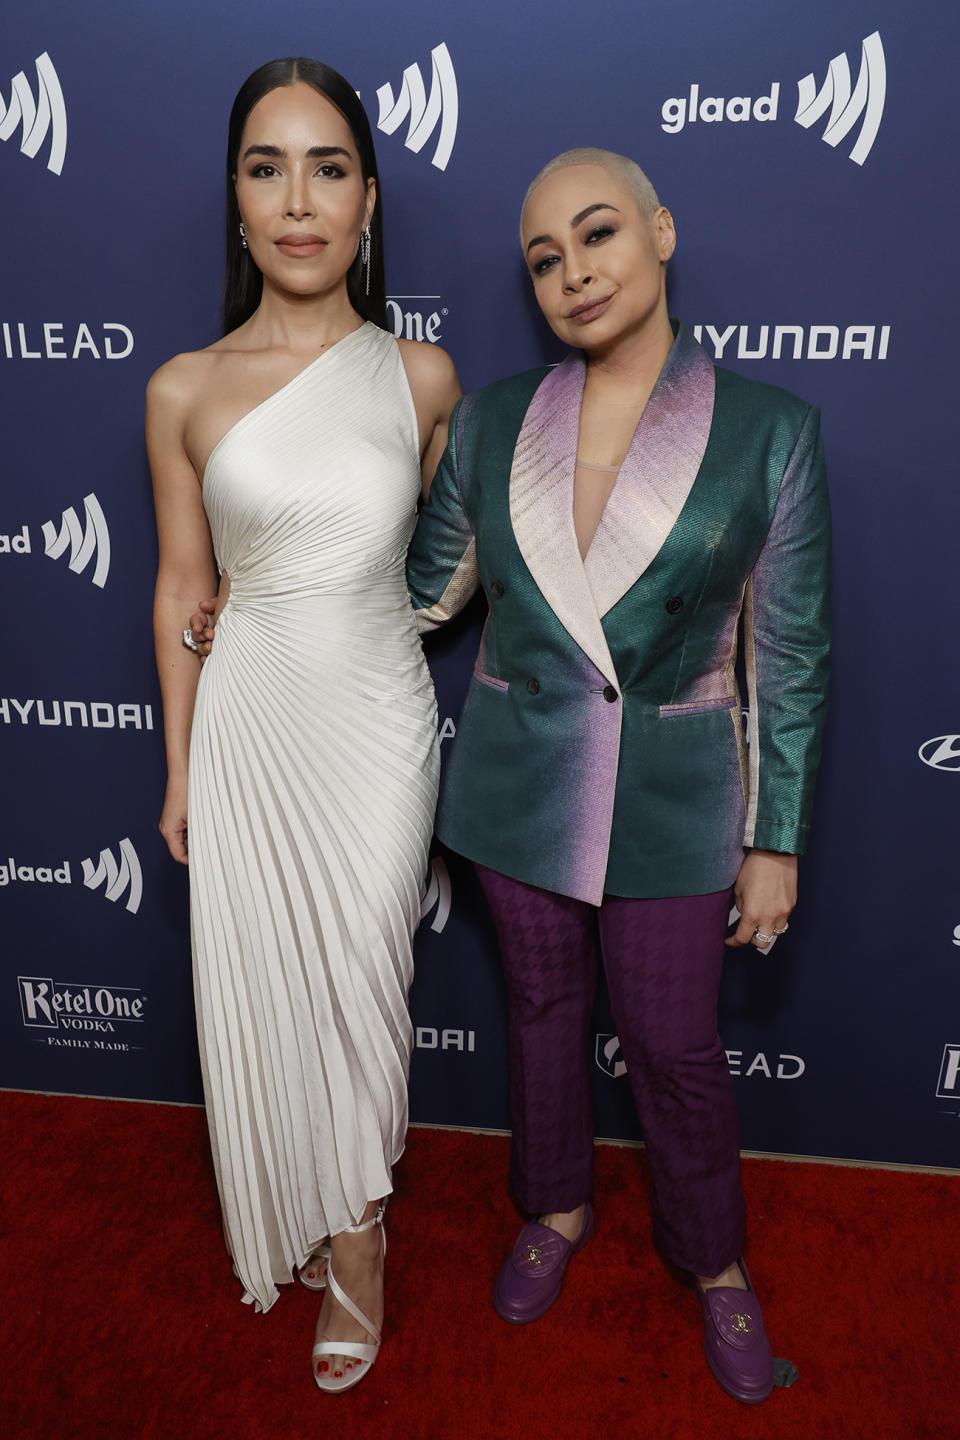 <p>BEVERLY HILLS, CALIFORNIA – MARCH 30: (L-R) Juliana Joel and Raven-Symon√© attend the GLAAD Media Awards at The Beverly Hilton on March 30, 2023 in Beverly Hills, California. (Photo by Frazer Harrison/Getty Images for GLAAD)</p>